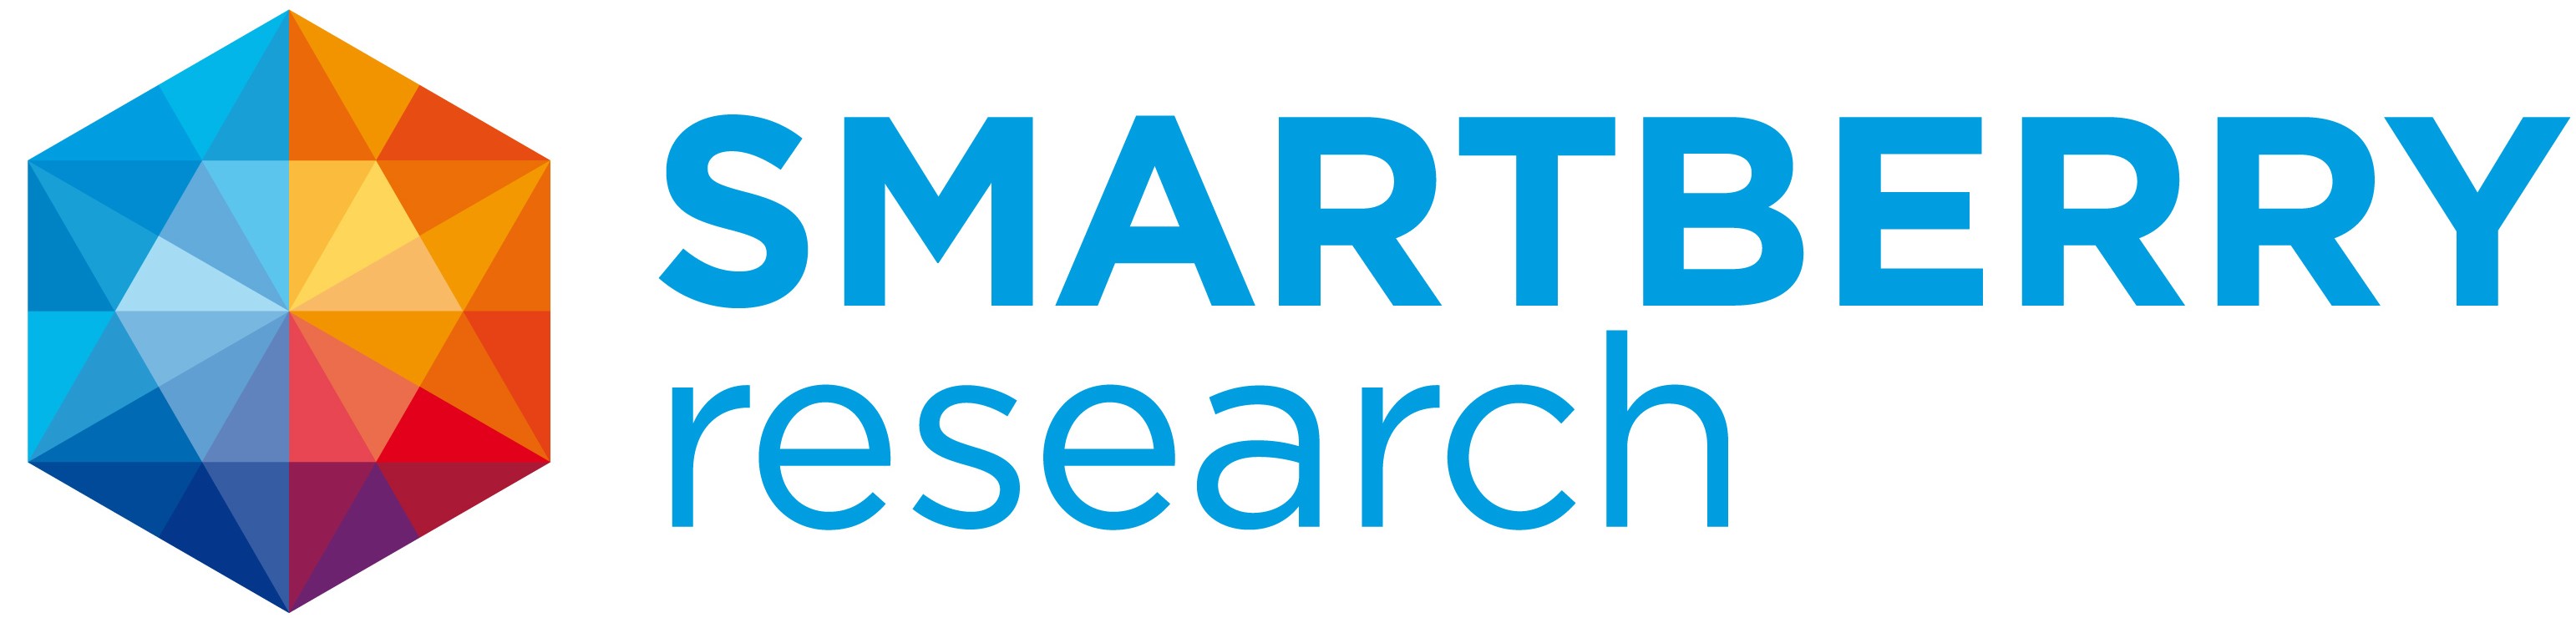 Smartberry Research